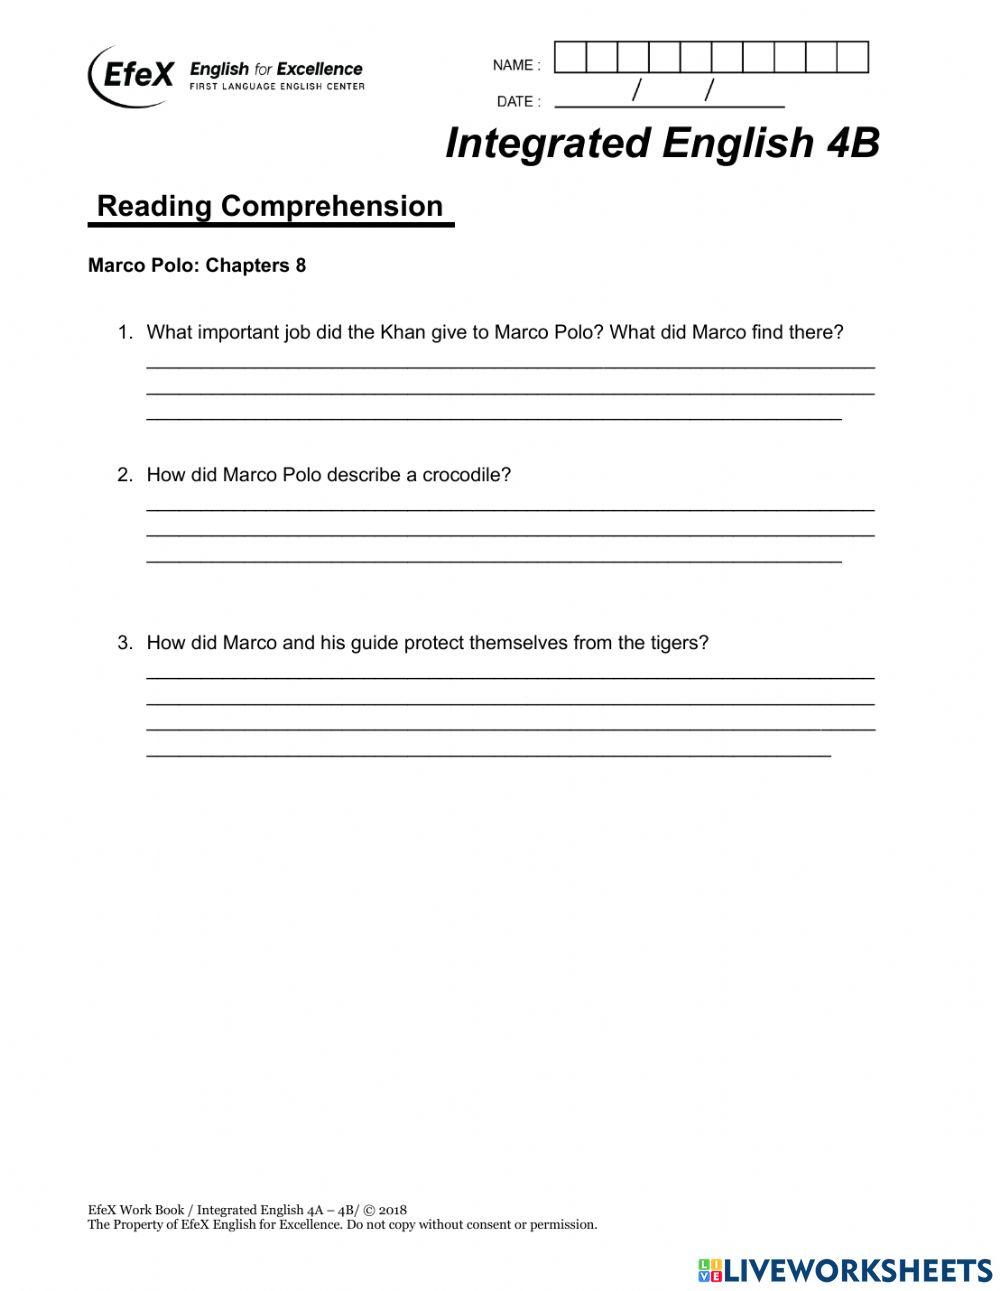 IE 4B Reading COmprehensions chp 8